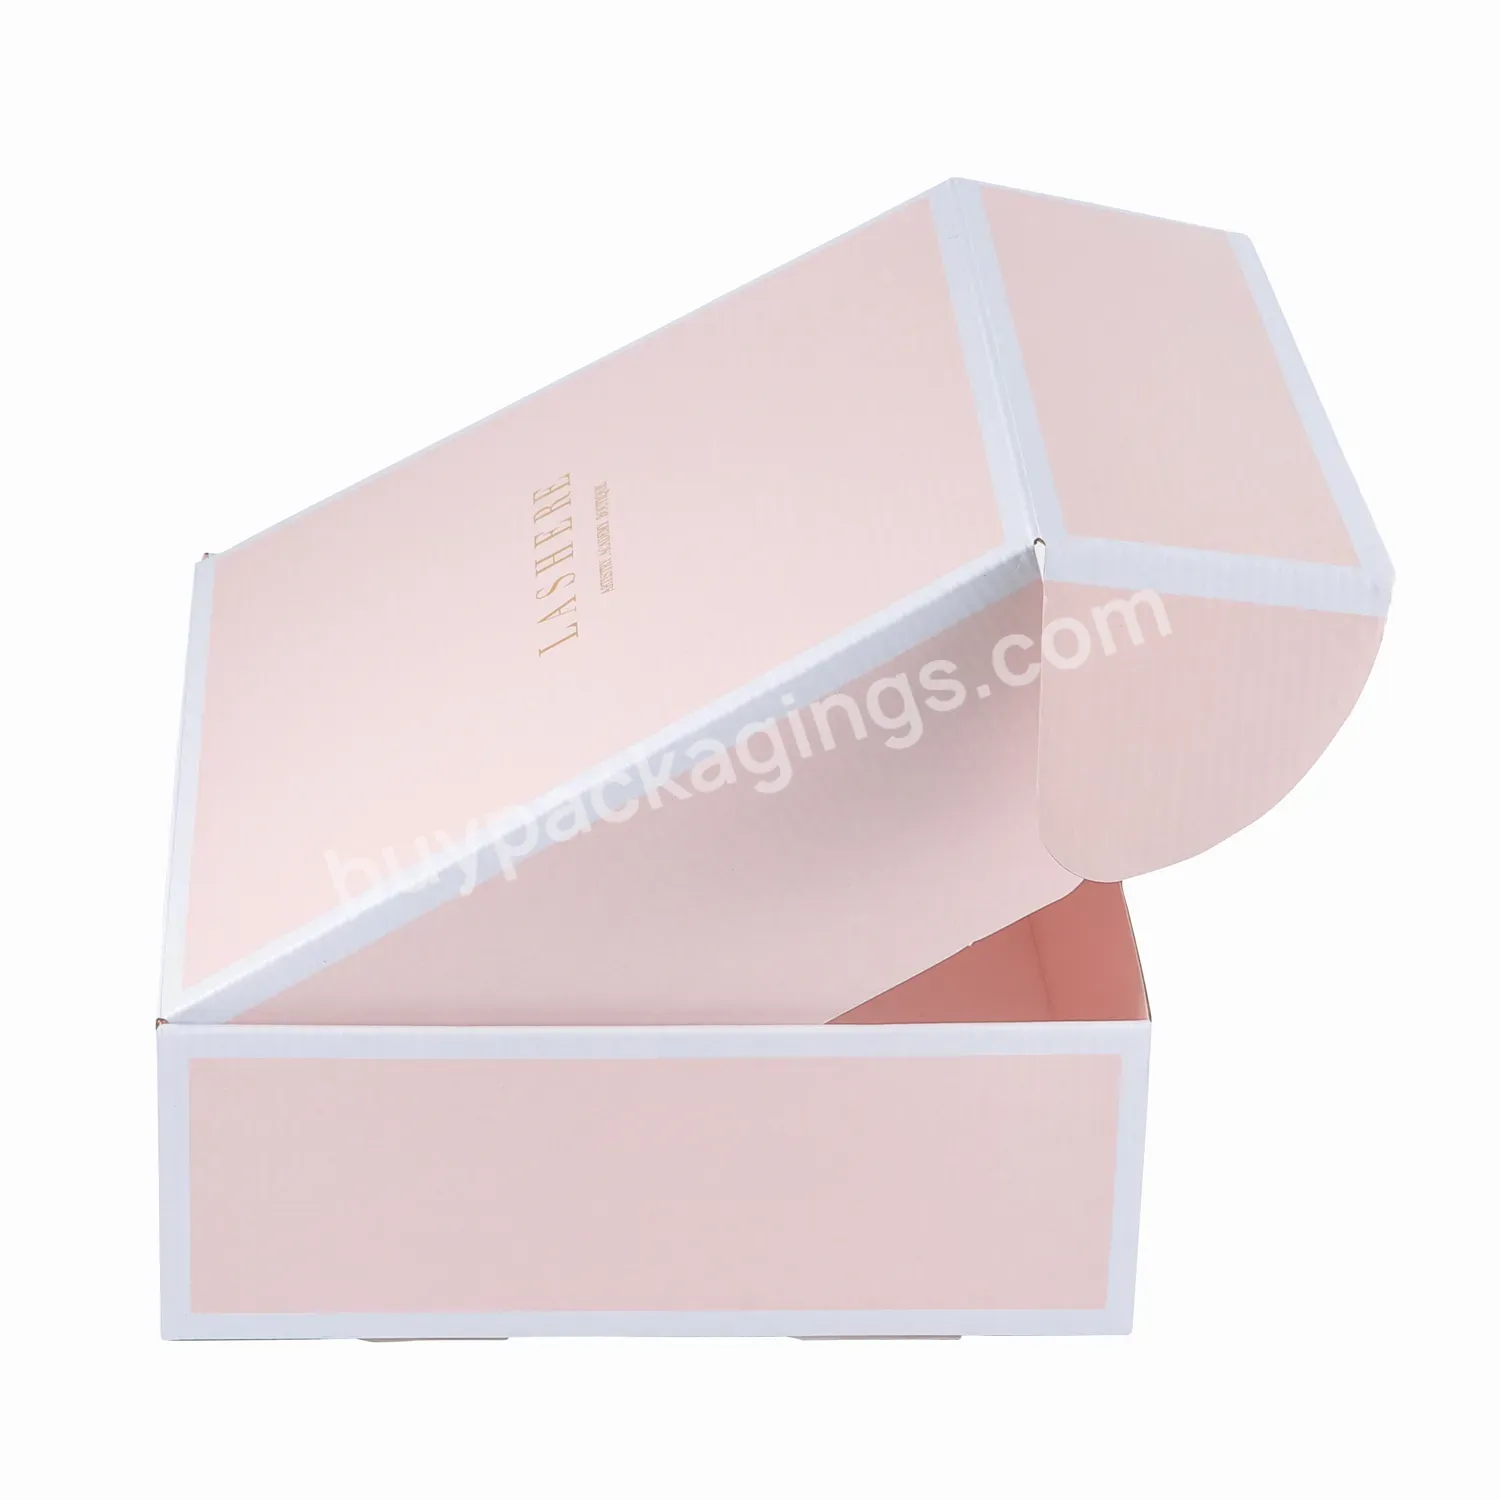 Corrugated Box Eco Friendly Packaging Apparel Clothing Hair Mailer Boxes Packing Shipping Mailer Box Packaging With Logo